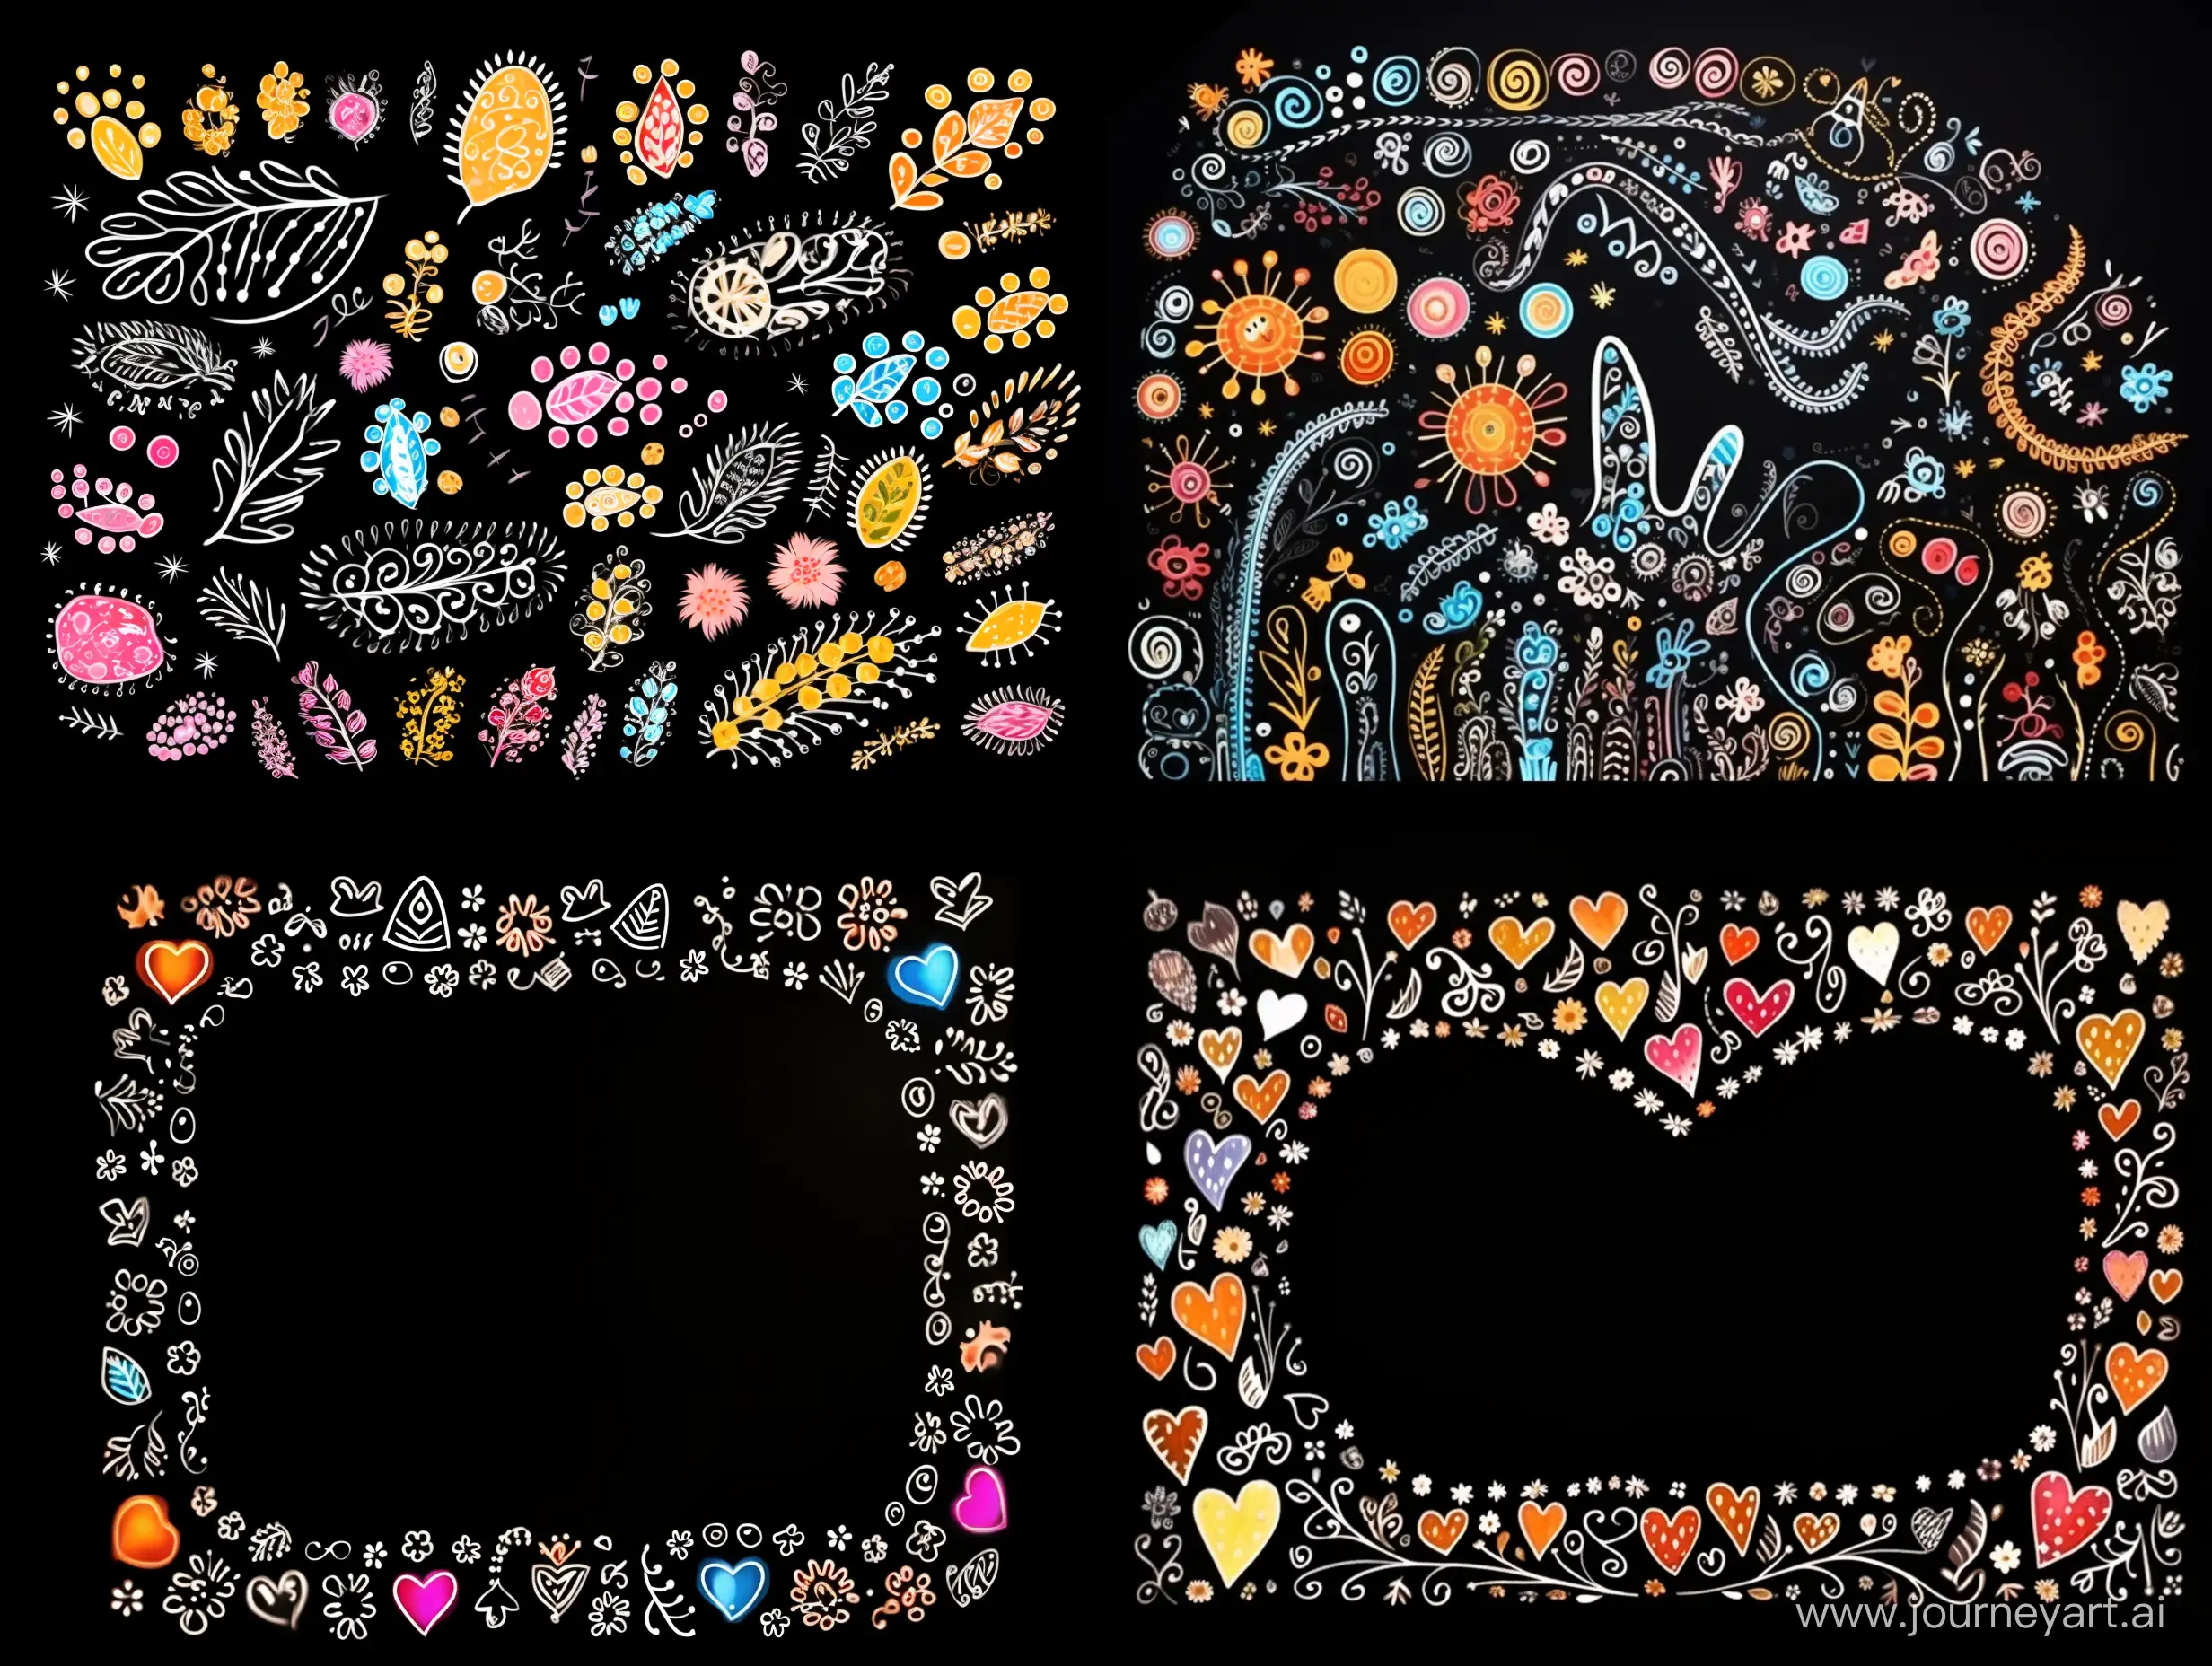 Whimsical-Doodling-Cute-Cat-in-Gingerbread-Style-with-Intricate-Patterns